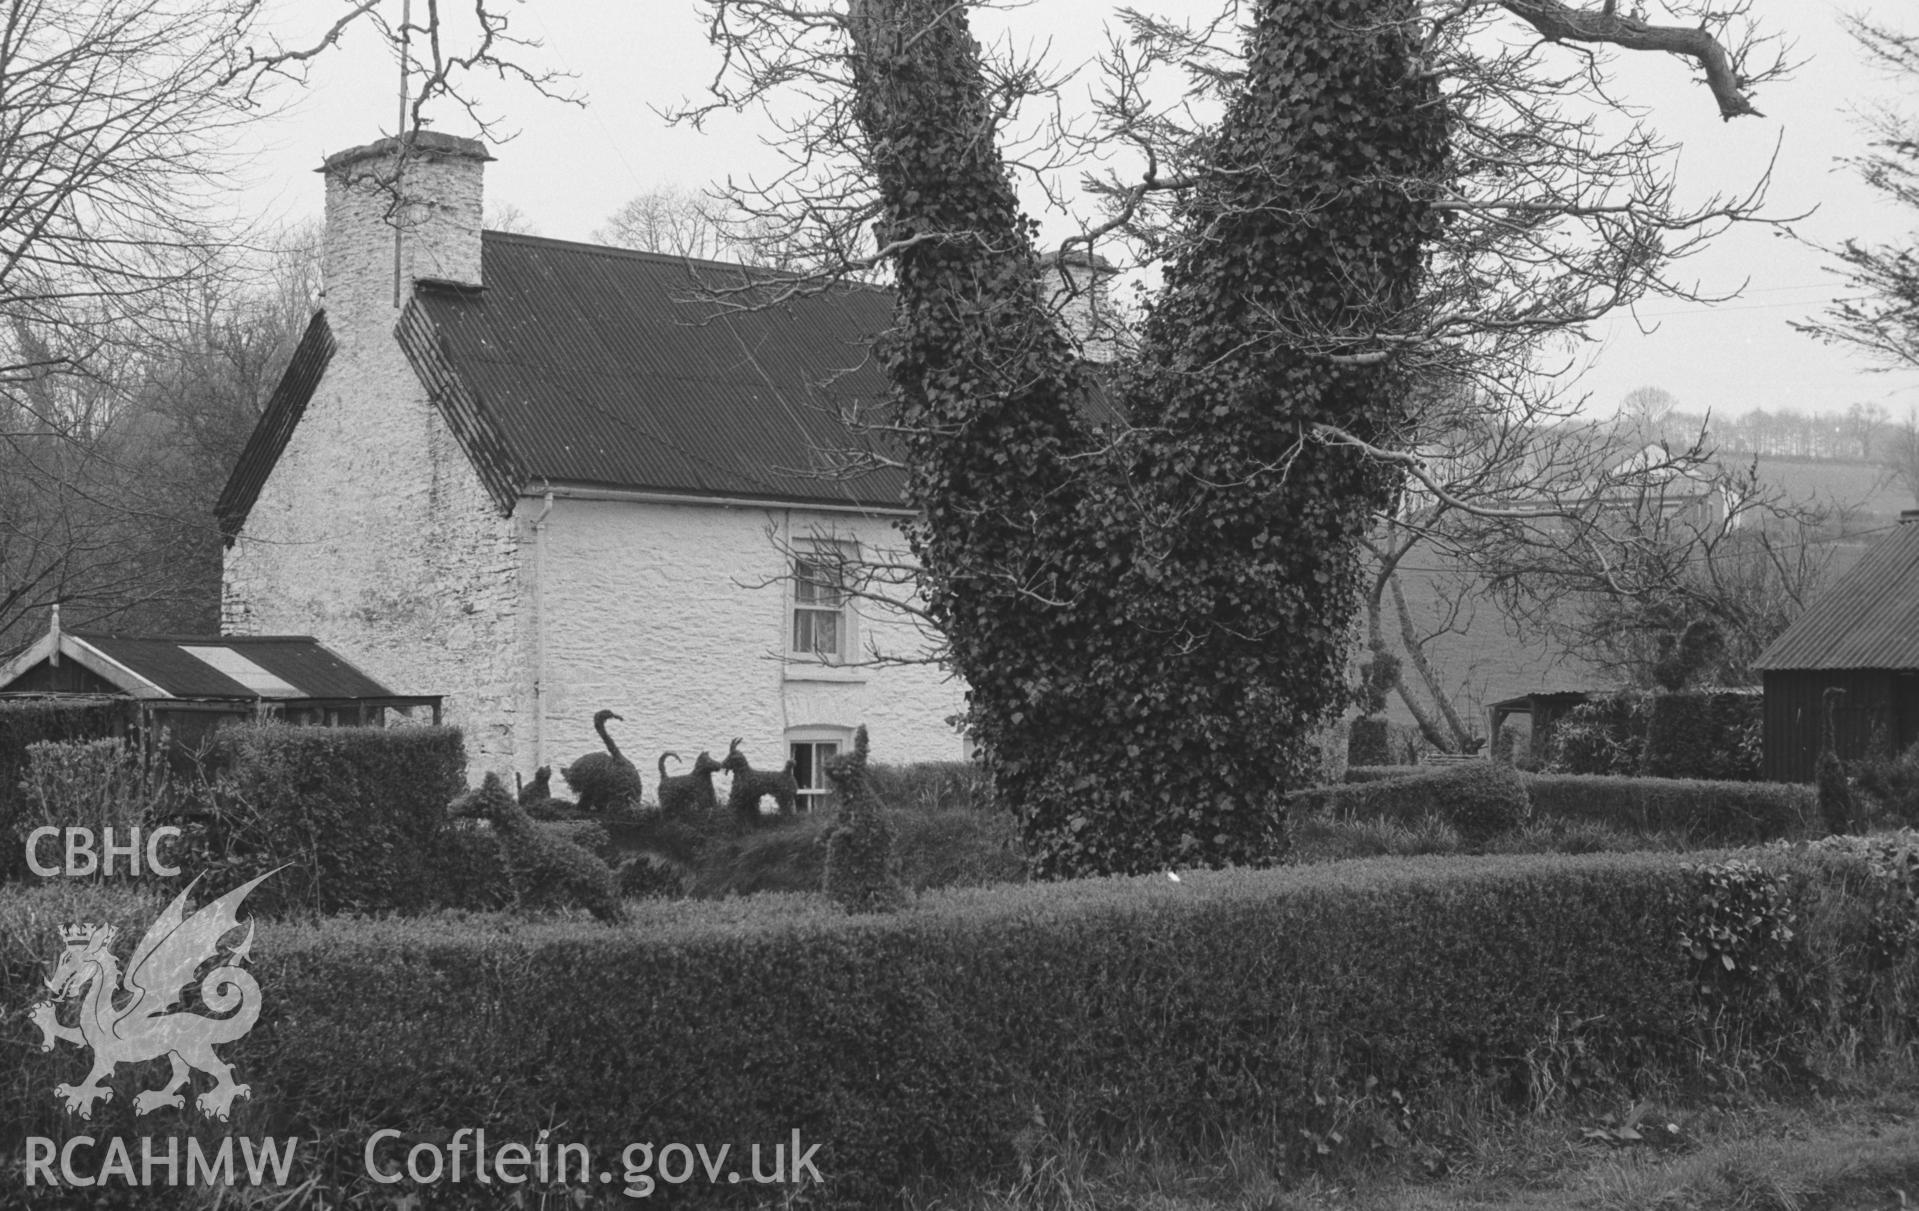 Digital copy of a black and white negative showing topiary in a garden on the north side of the main road 300m east of Llannwnen. Photographed by Arthur O. Chater in April 1966 from Grid Reference SN 535 473, looking north east.